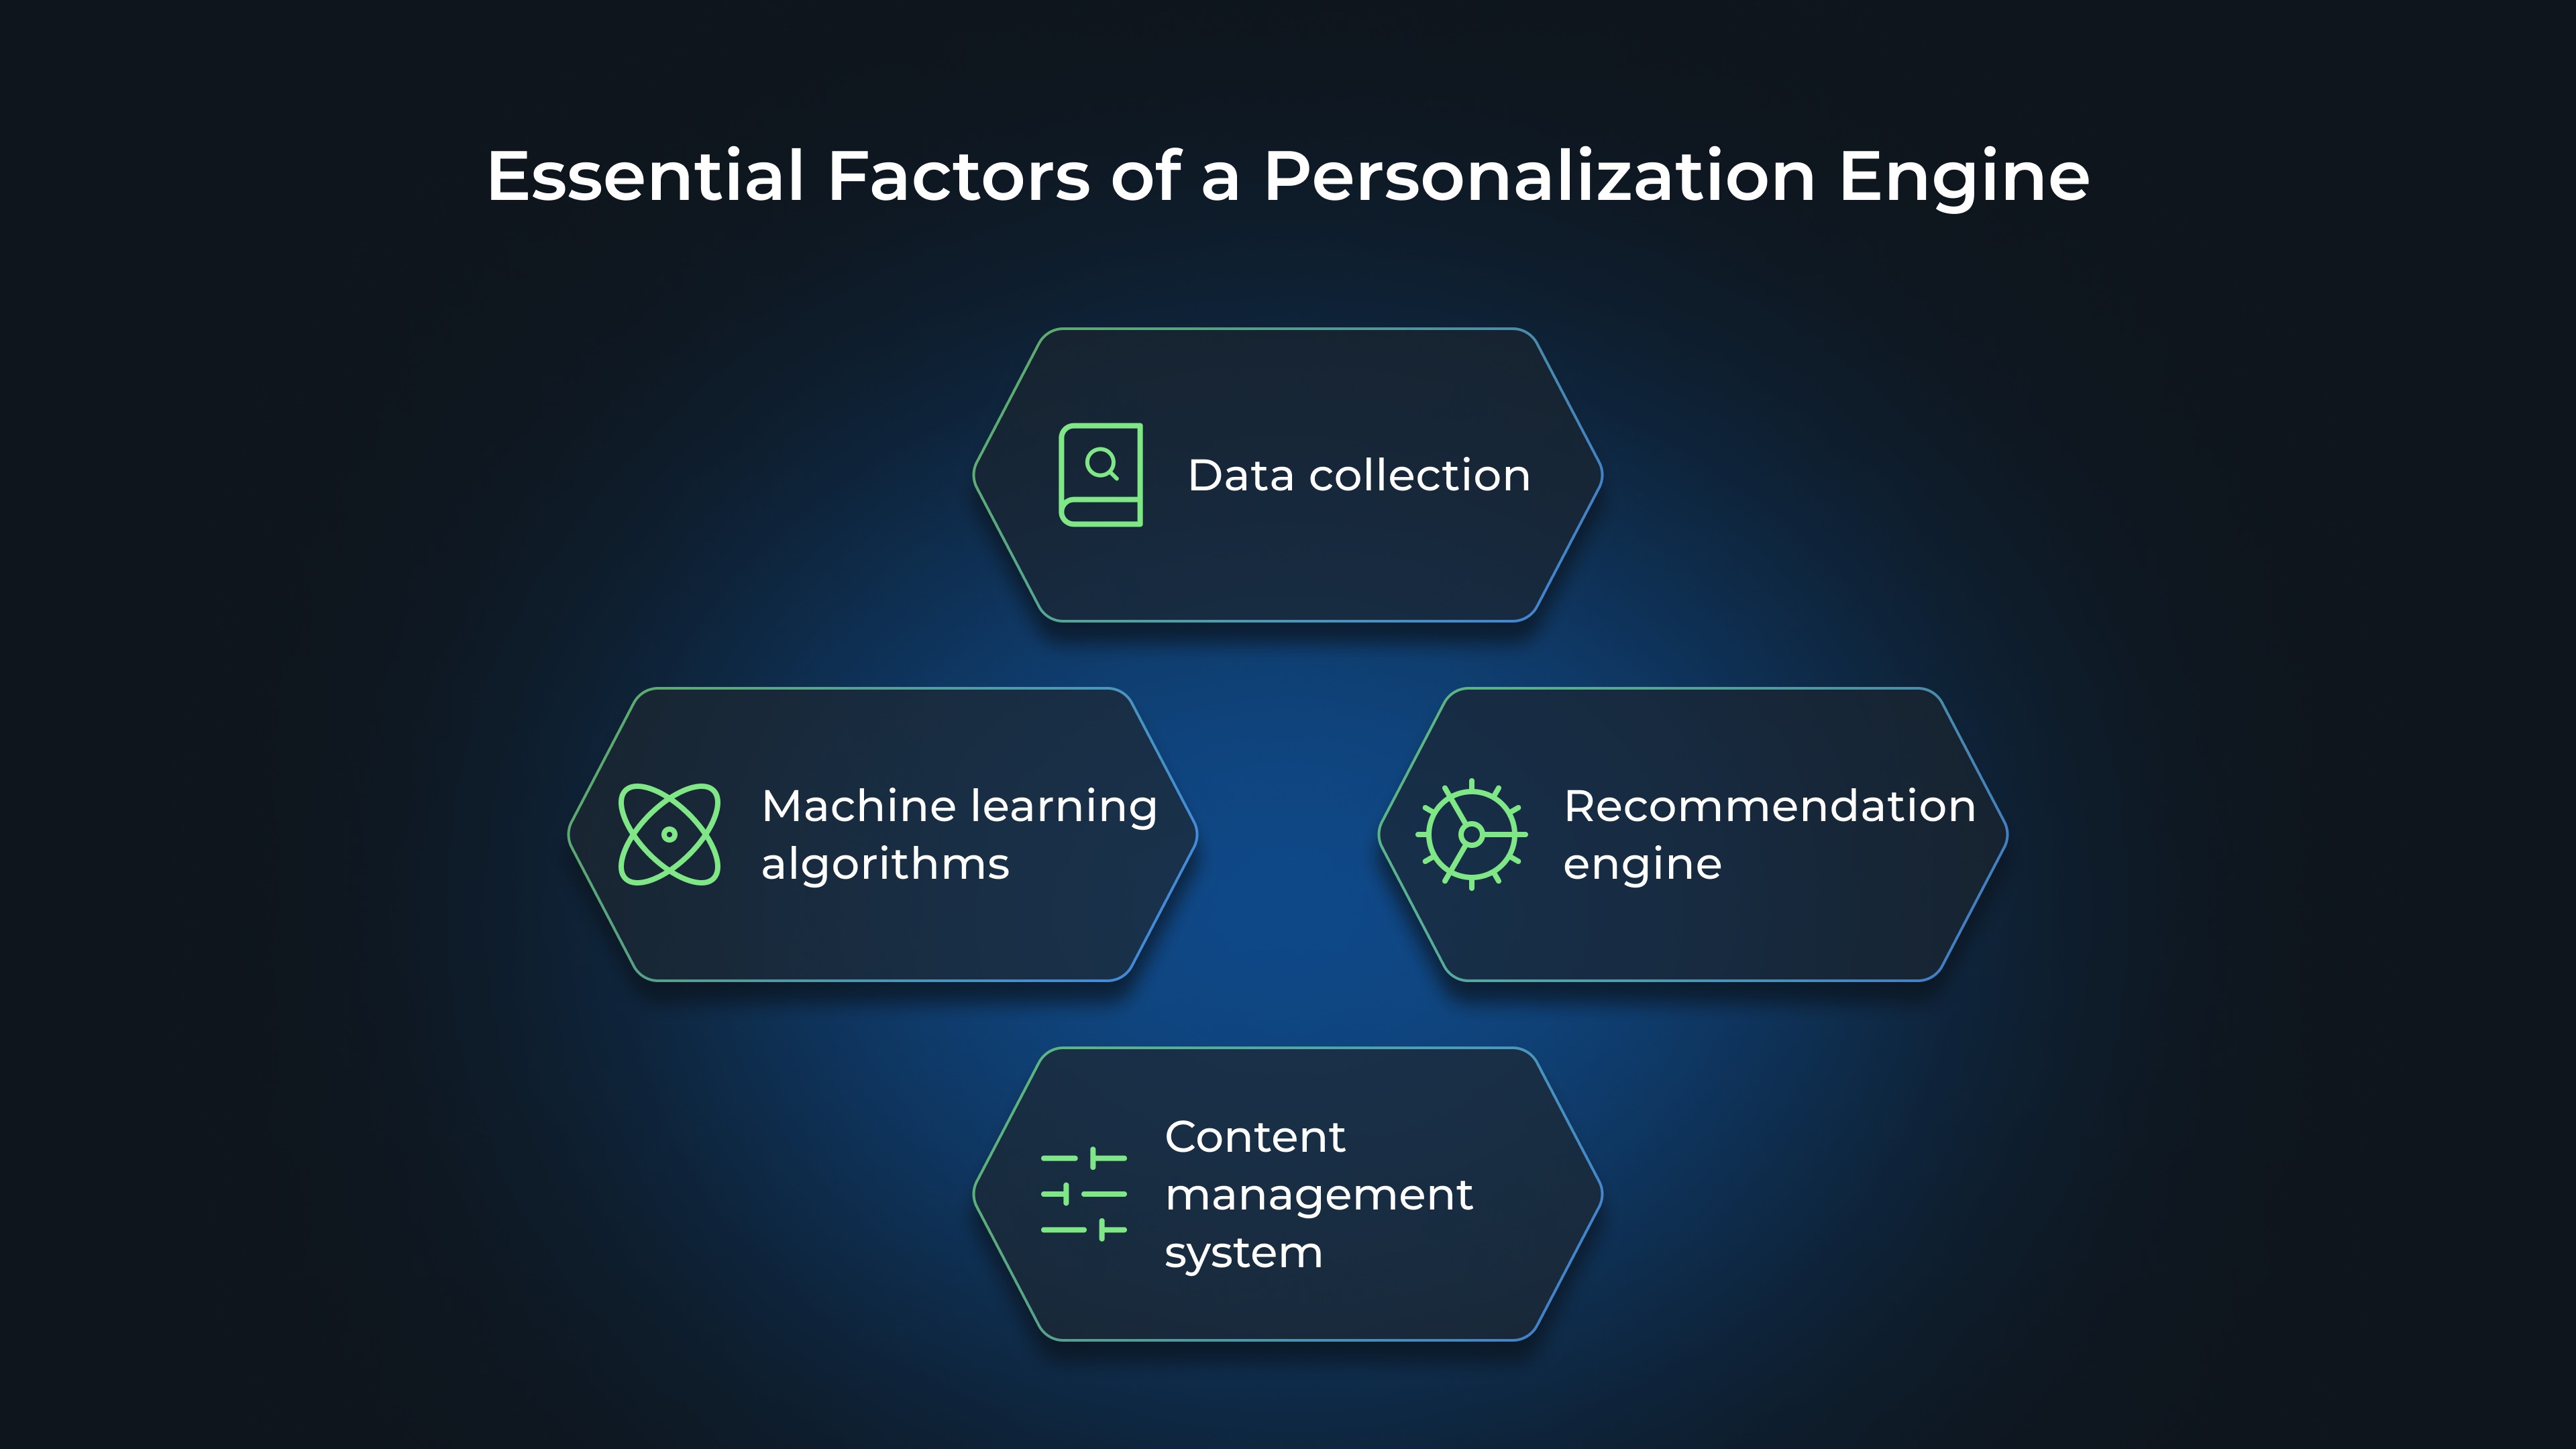 Essential Factors of a Personalization Engine: Data collection, Machine learning algorithms, Recommendation engine, Content management system